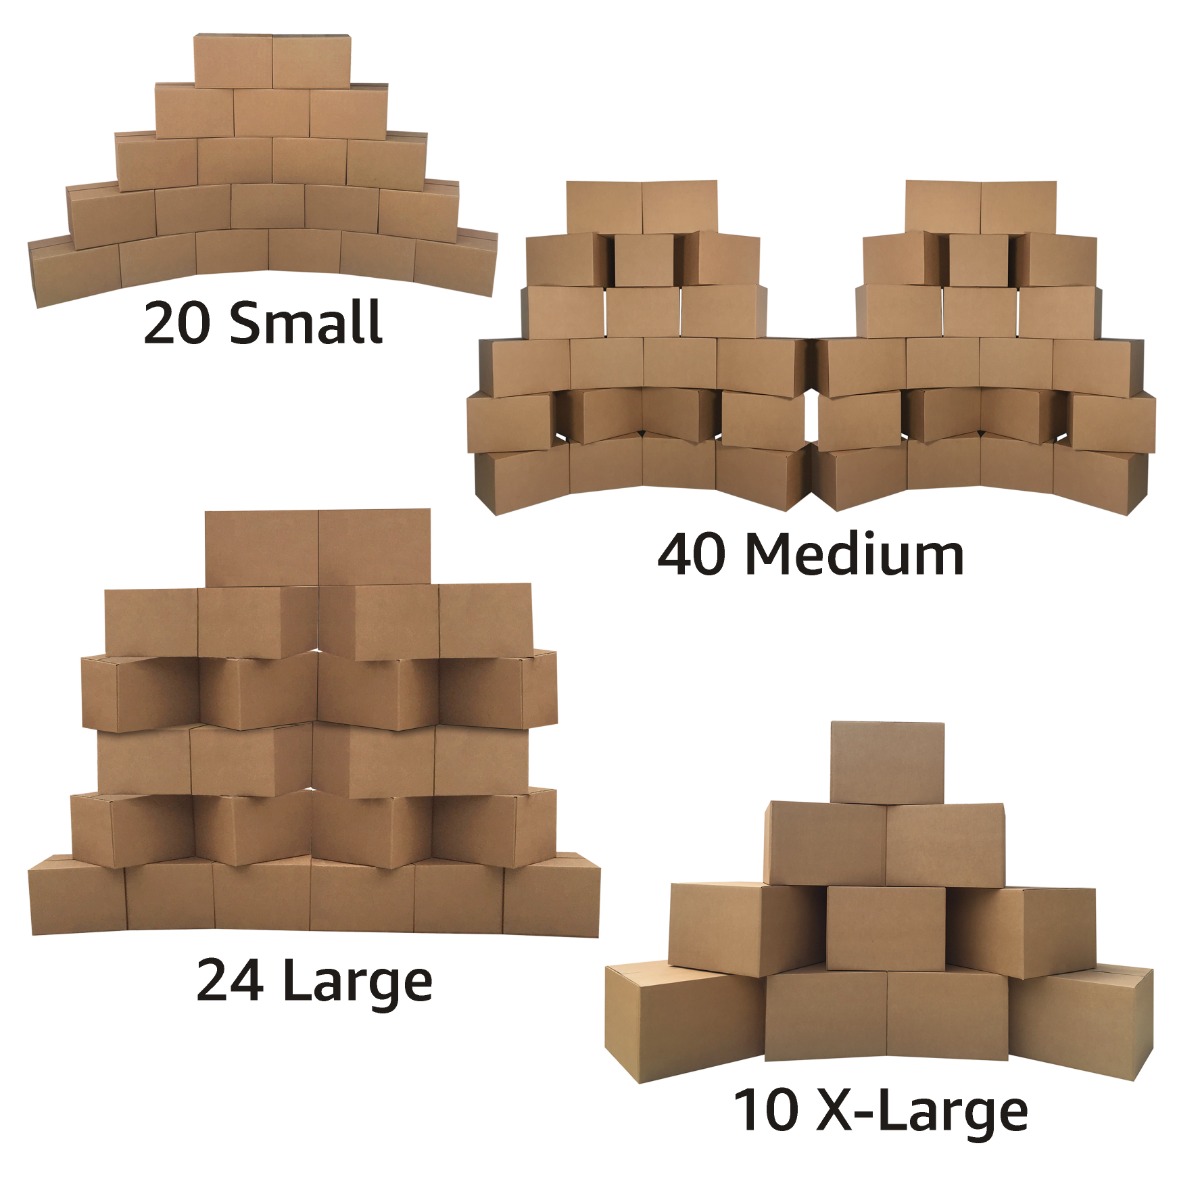 UBMOVE 8 Room Economy Kit 94 Boxes, Moving Supplies Tape &amp; Markers